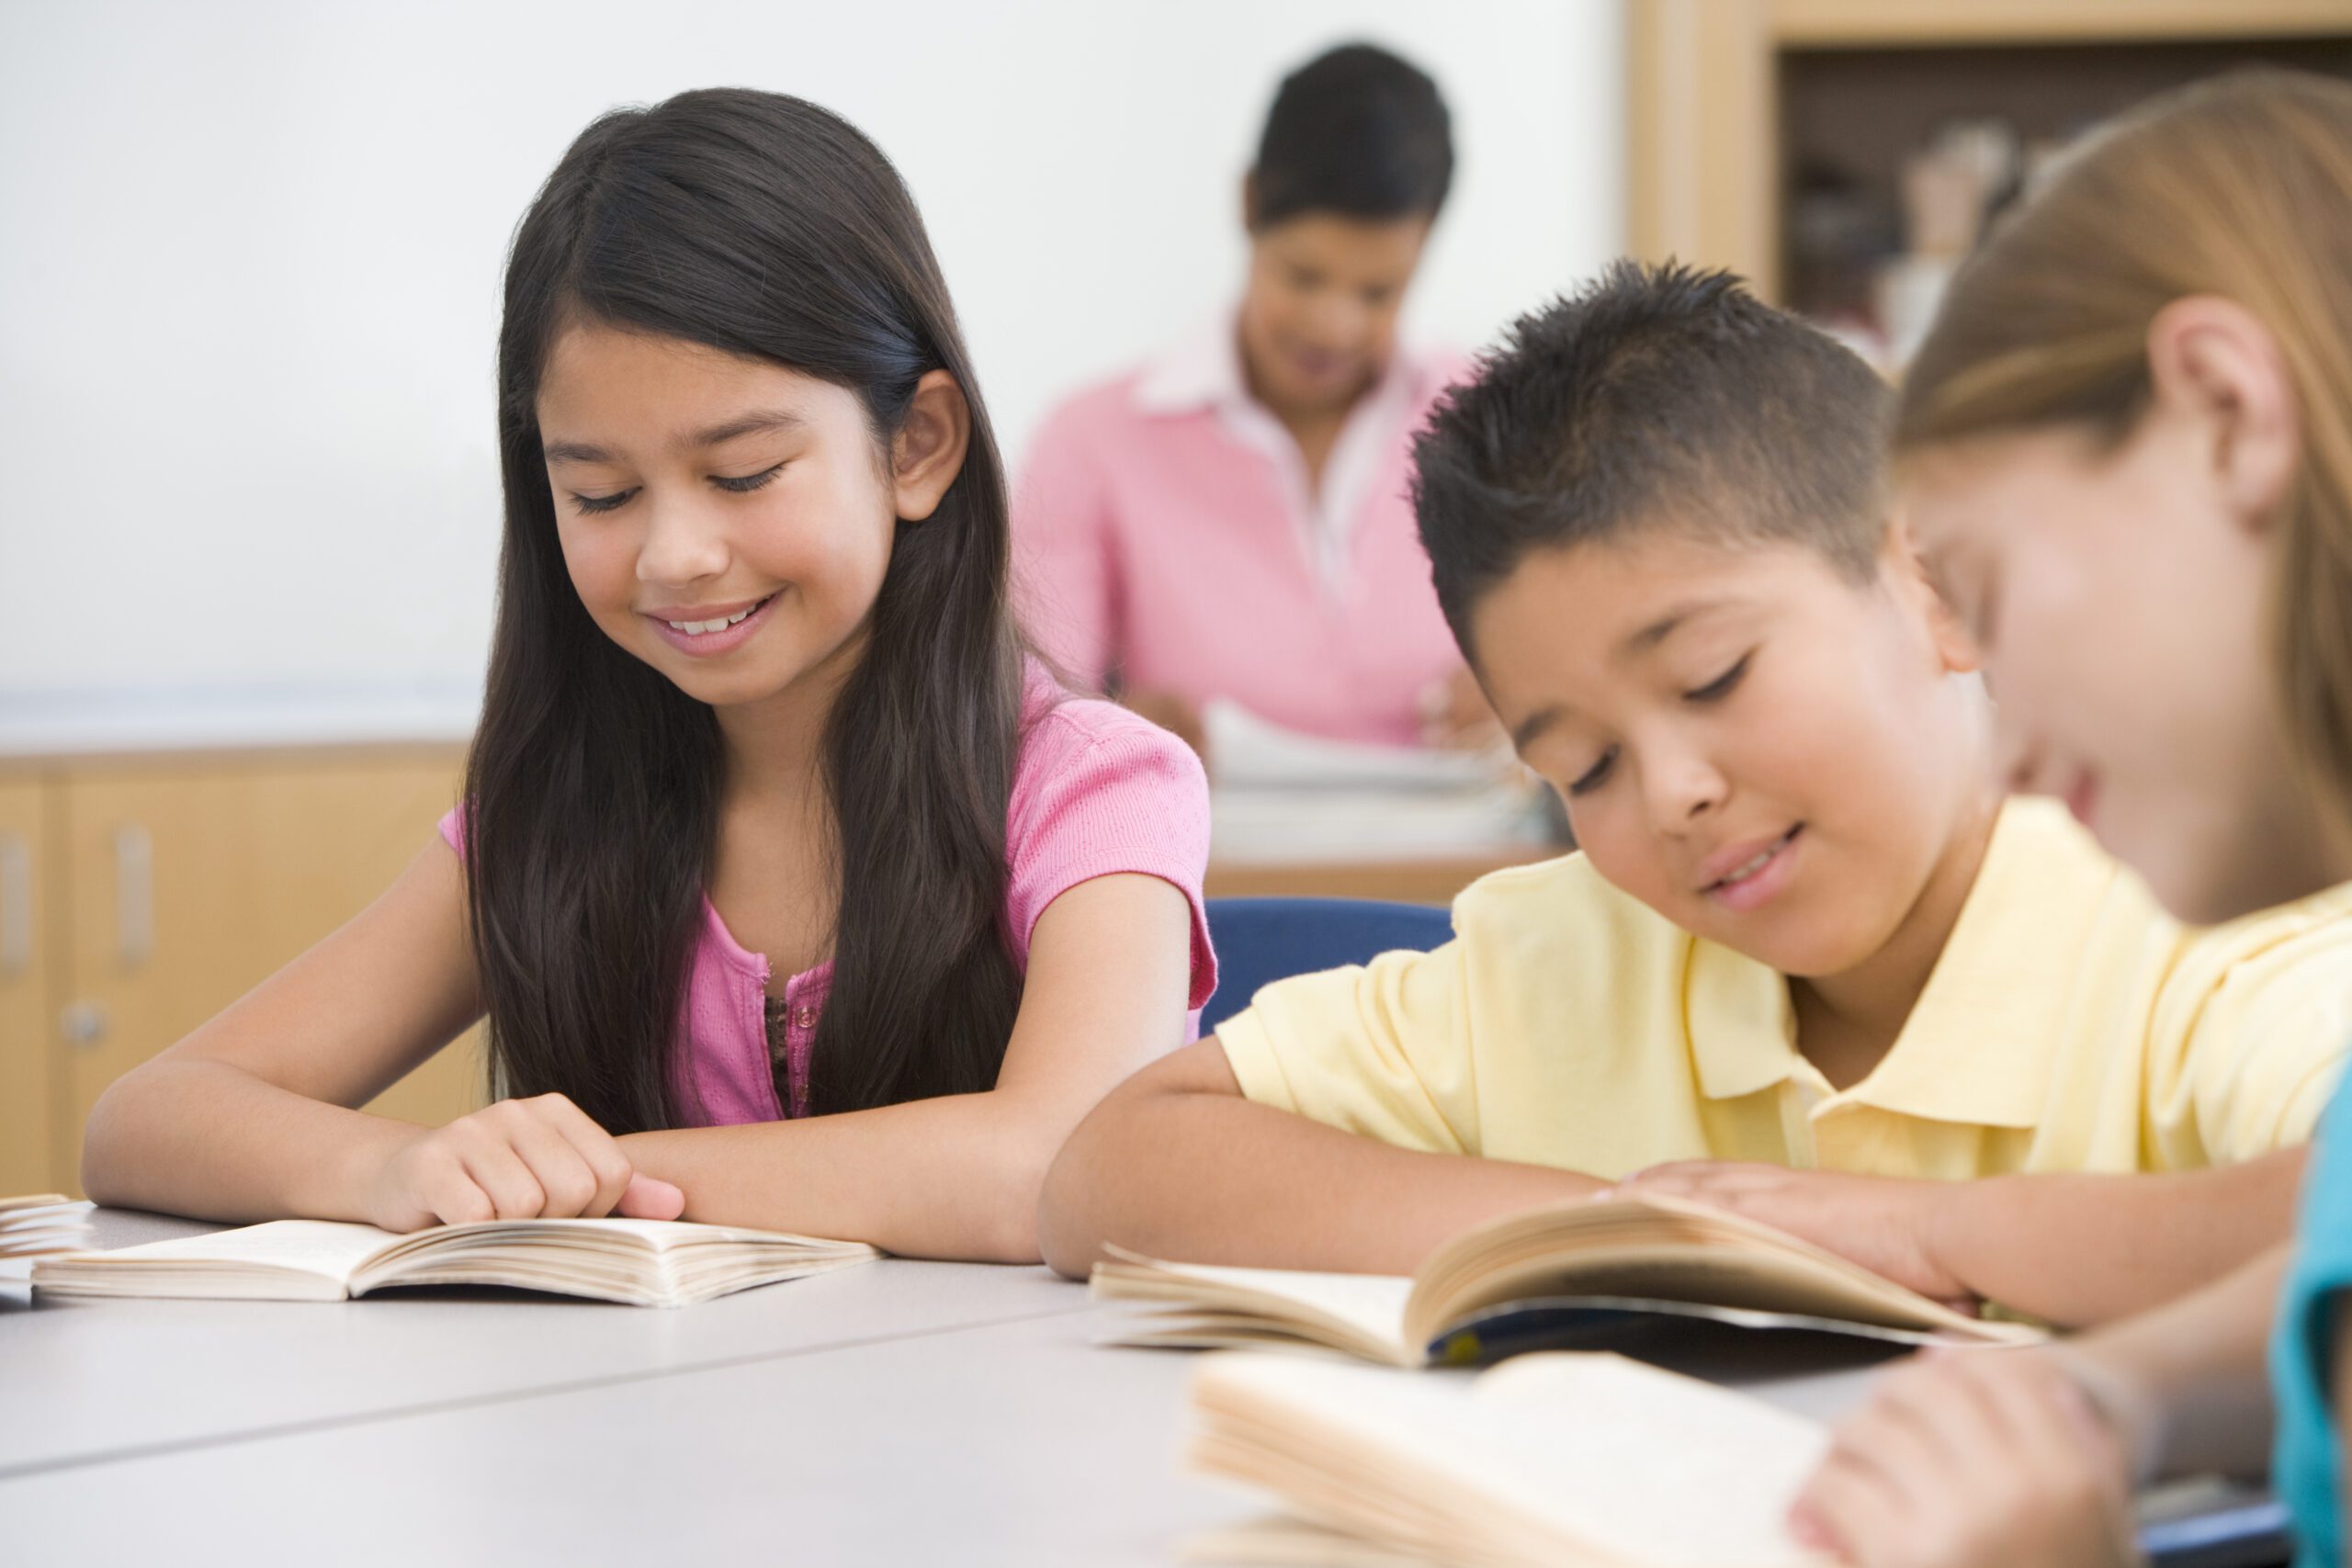 Student Success Story: Going Back to Basics With Math and Reading Comprehension